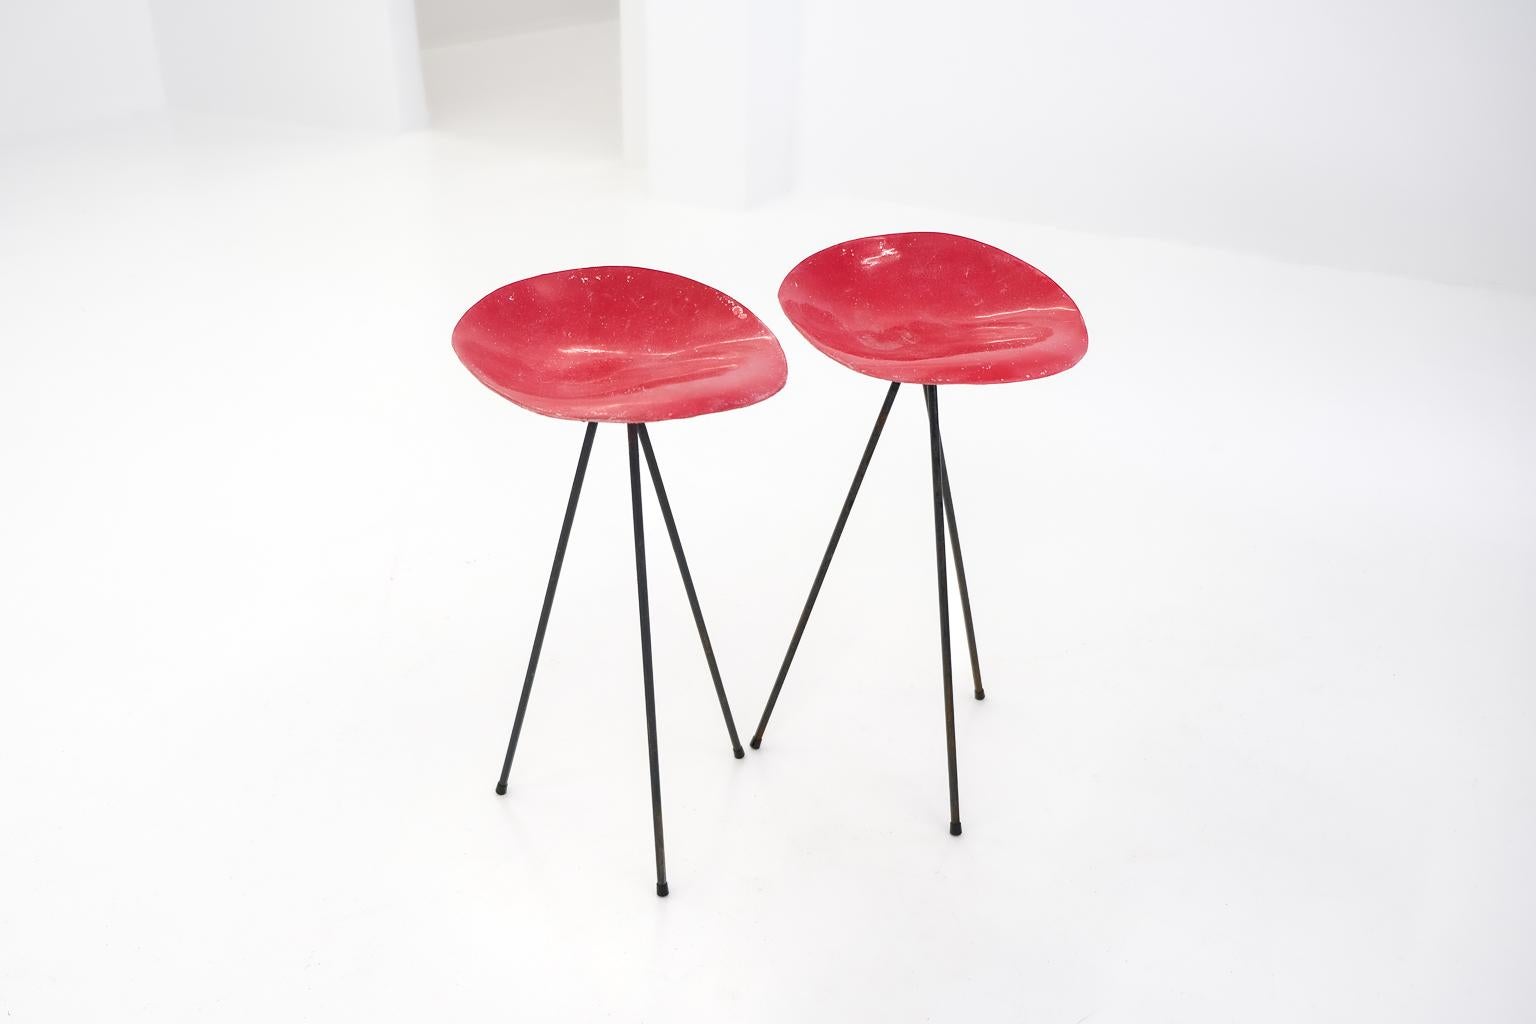 A Pair of tripod stool by Jean Raymond Picard/Jean-René Picard for S.E.T.A. For Sale 8